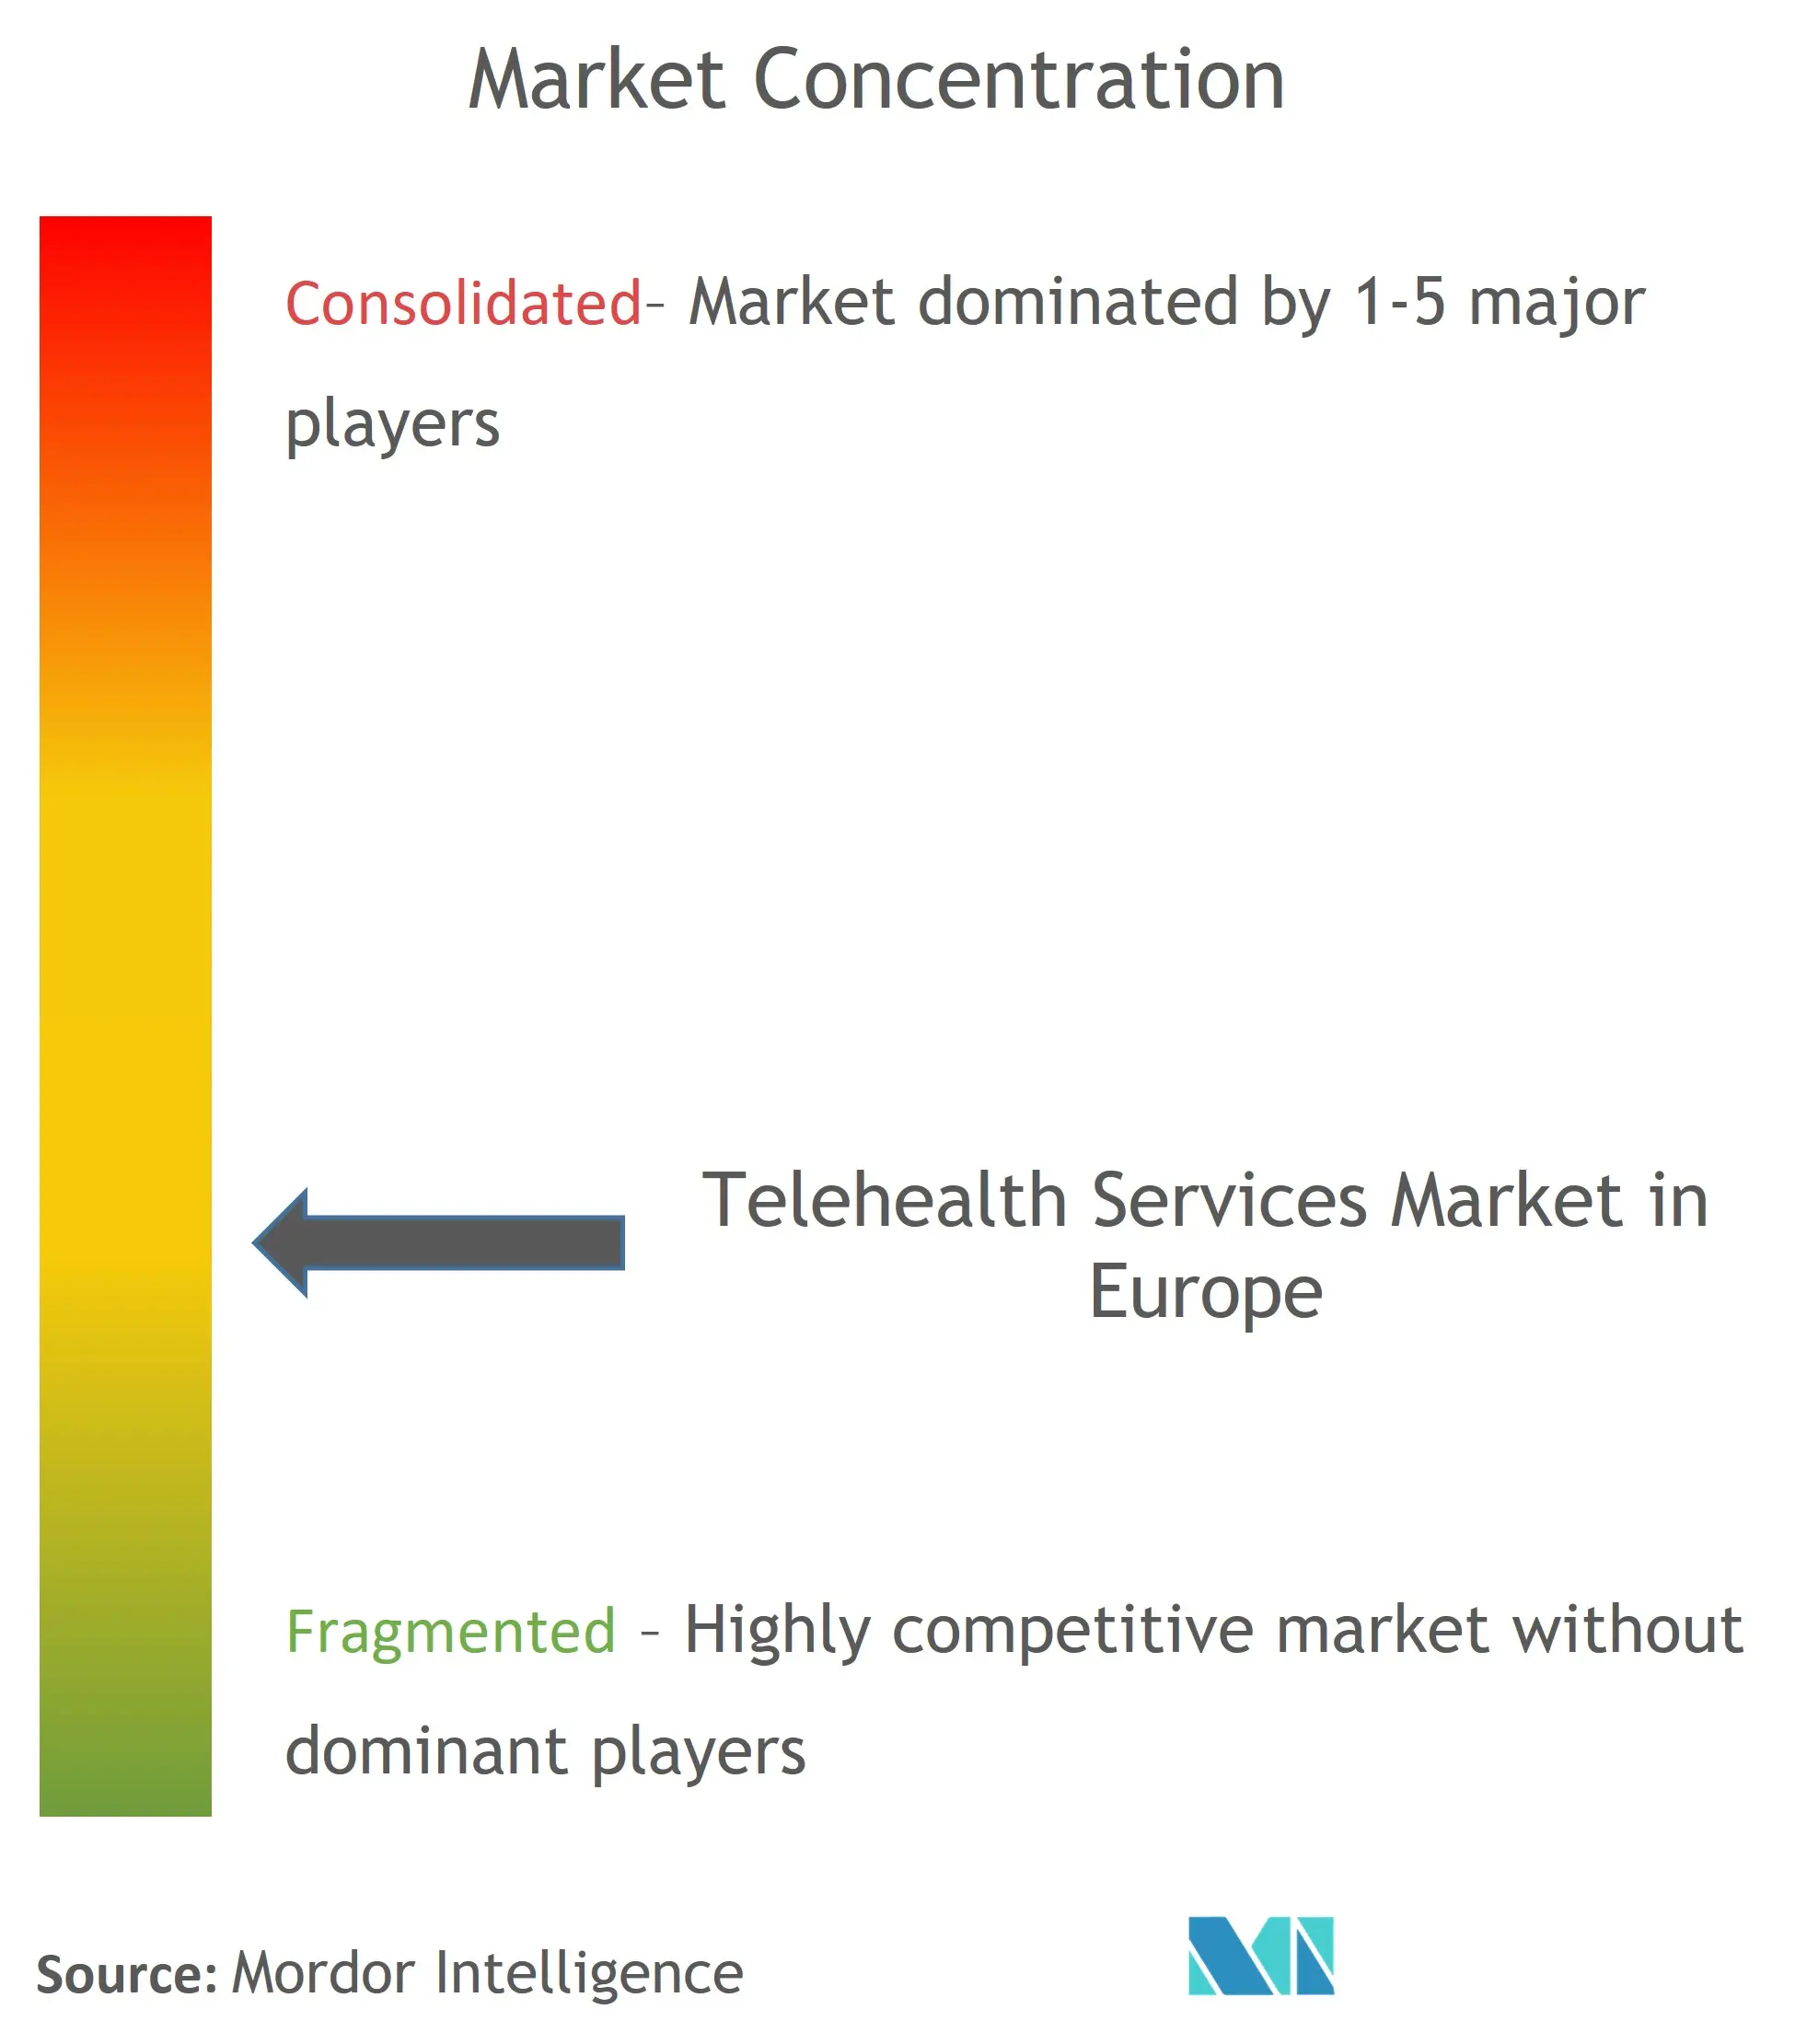 Europe Telehealth Services Market Concentration